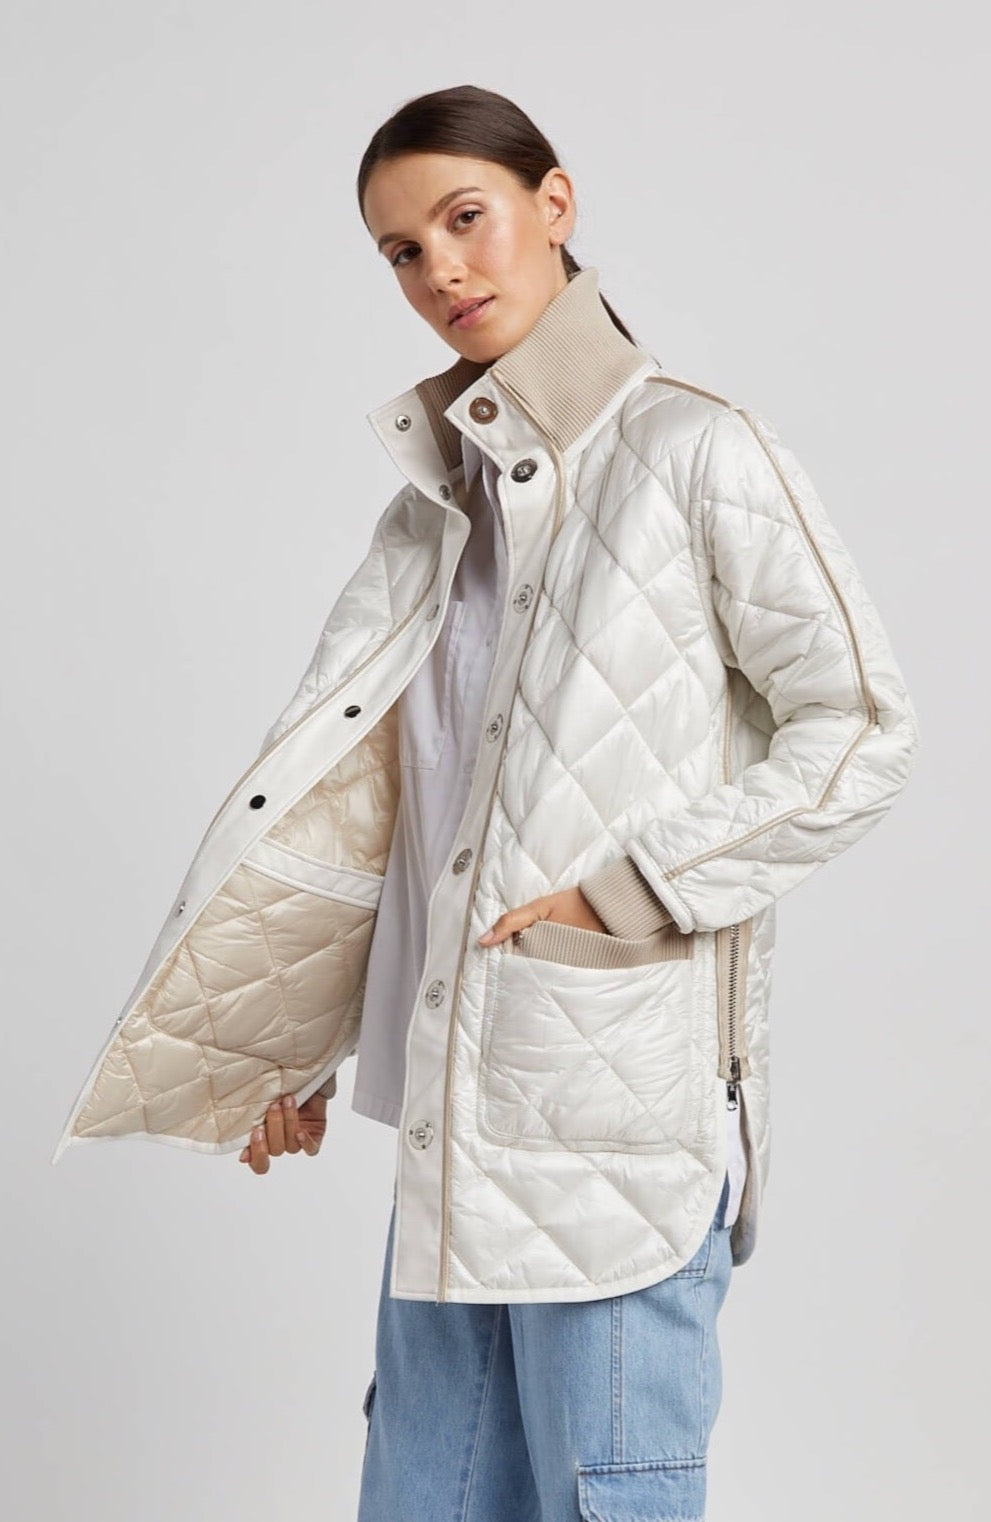 Adroit Atelier Nadine Reversible Quilted Coat With Vegan Leather Trim - Champagne/White